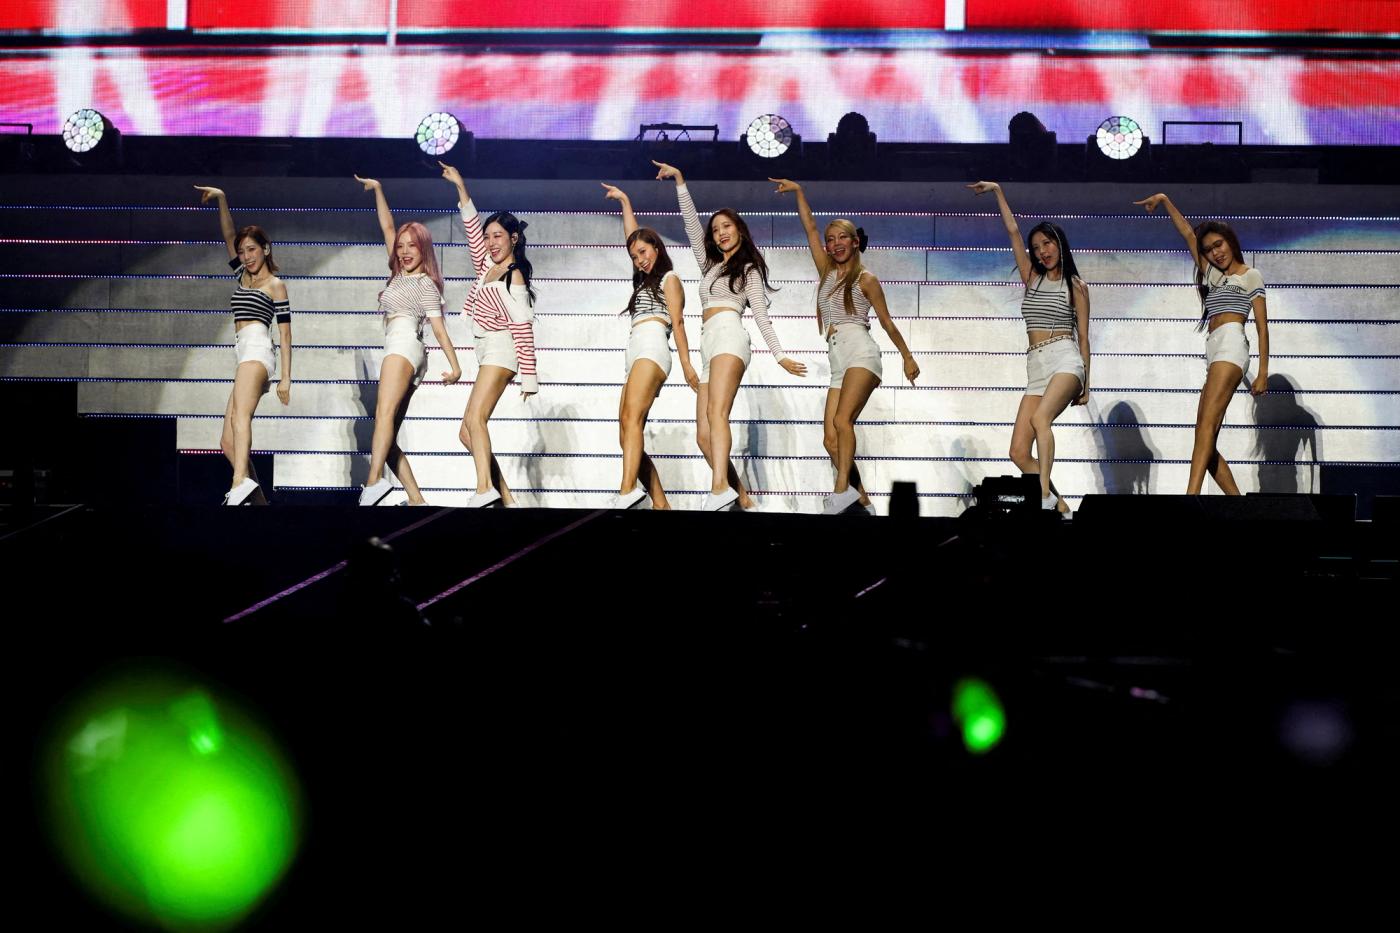 K-pop group Girls' Generation performs during a concert.